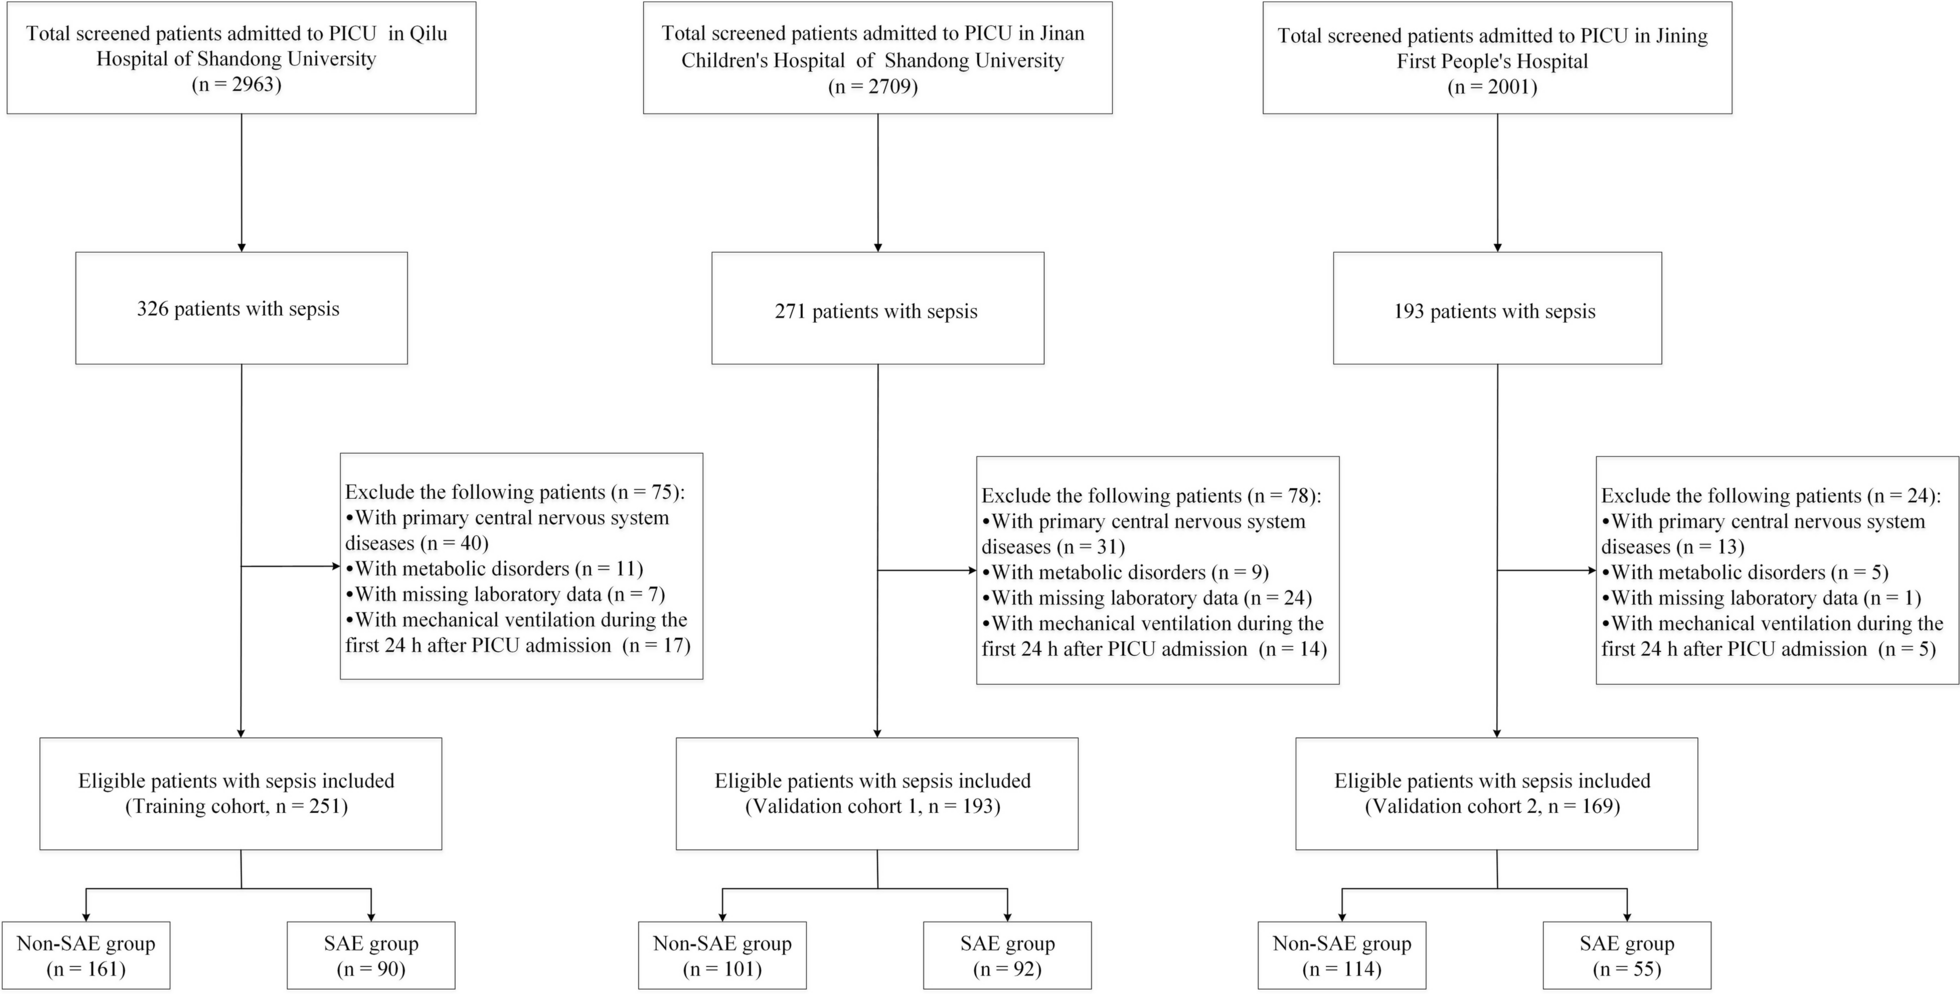 Development and validation of a nomogram to predict the risk of sepsis-associated encephalopathy for septic patients in PICU: a multicenter retrospective cohort study